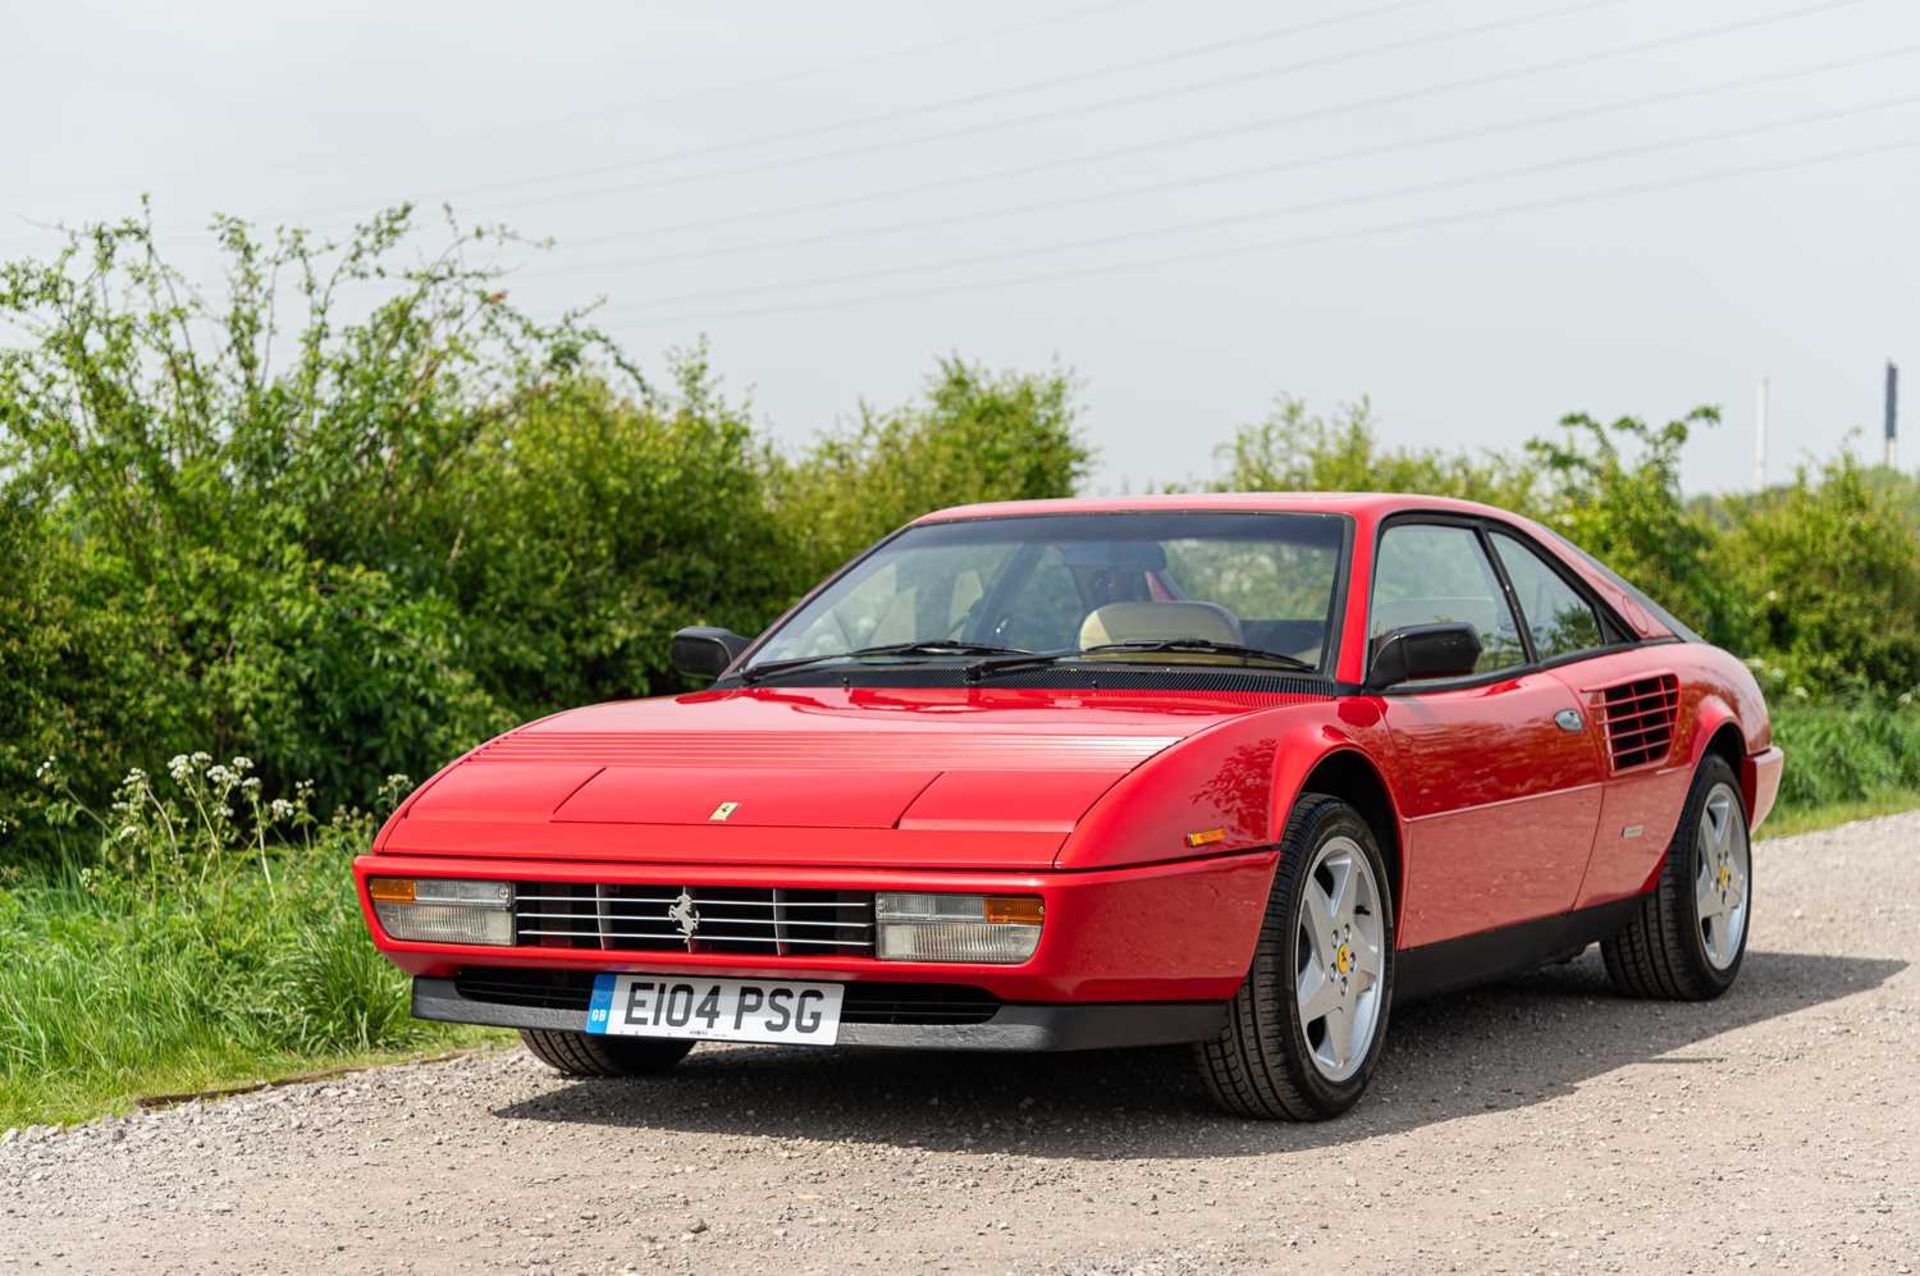 1988 Ferrari Mondial QV ***NO RESERVE*** Remained in the same ownership for nearly two decades finis - Image 4 of 91